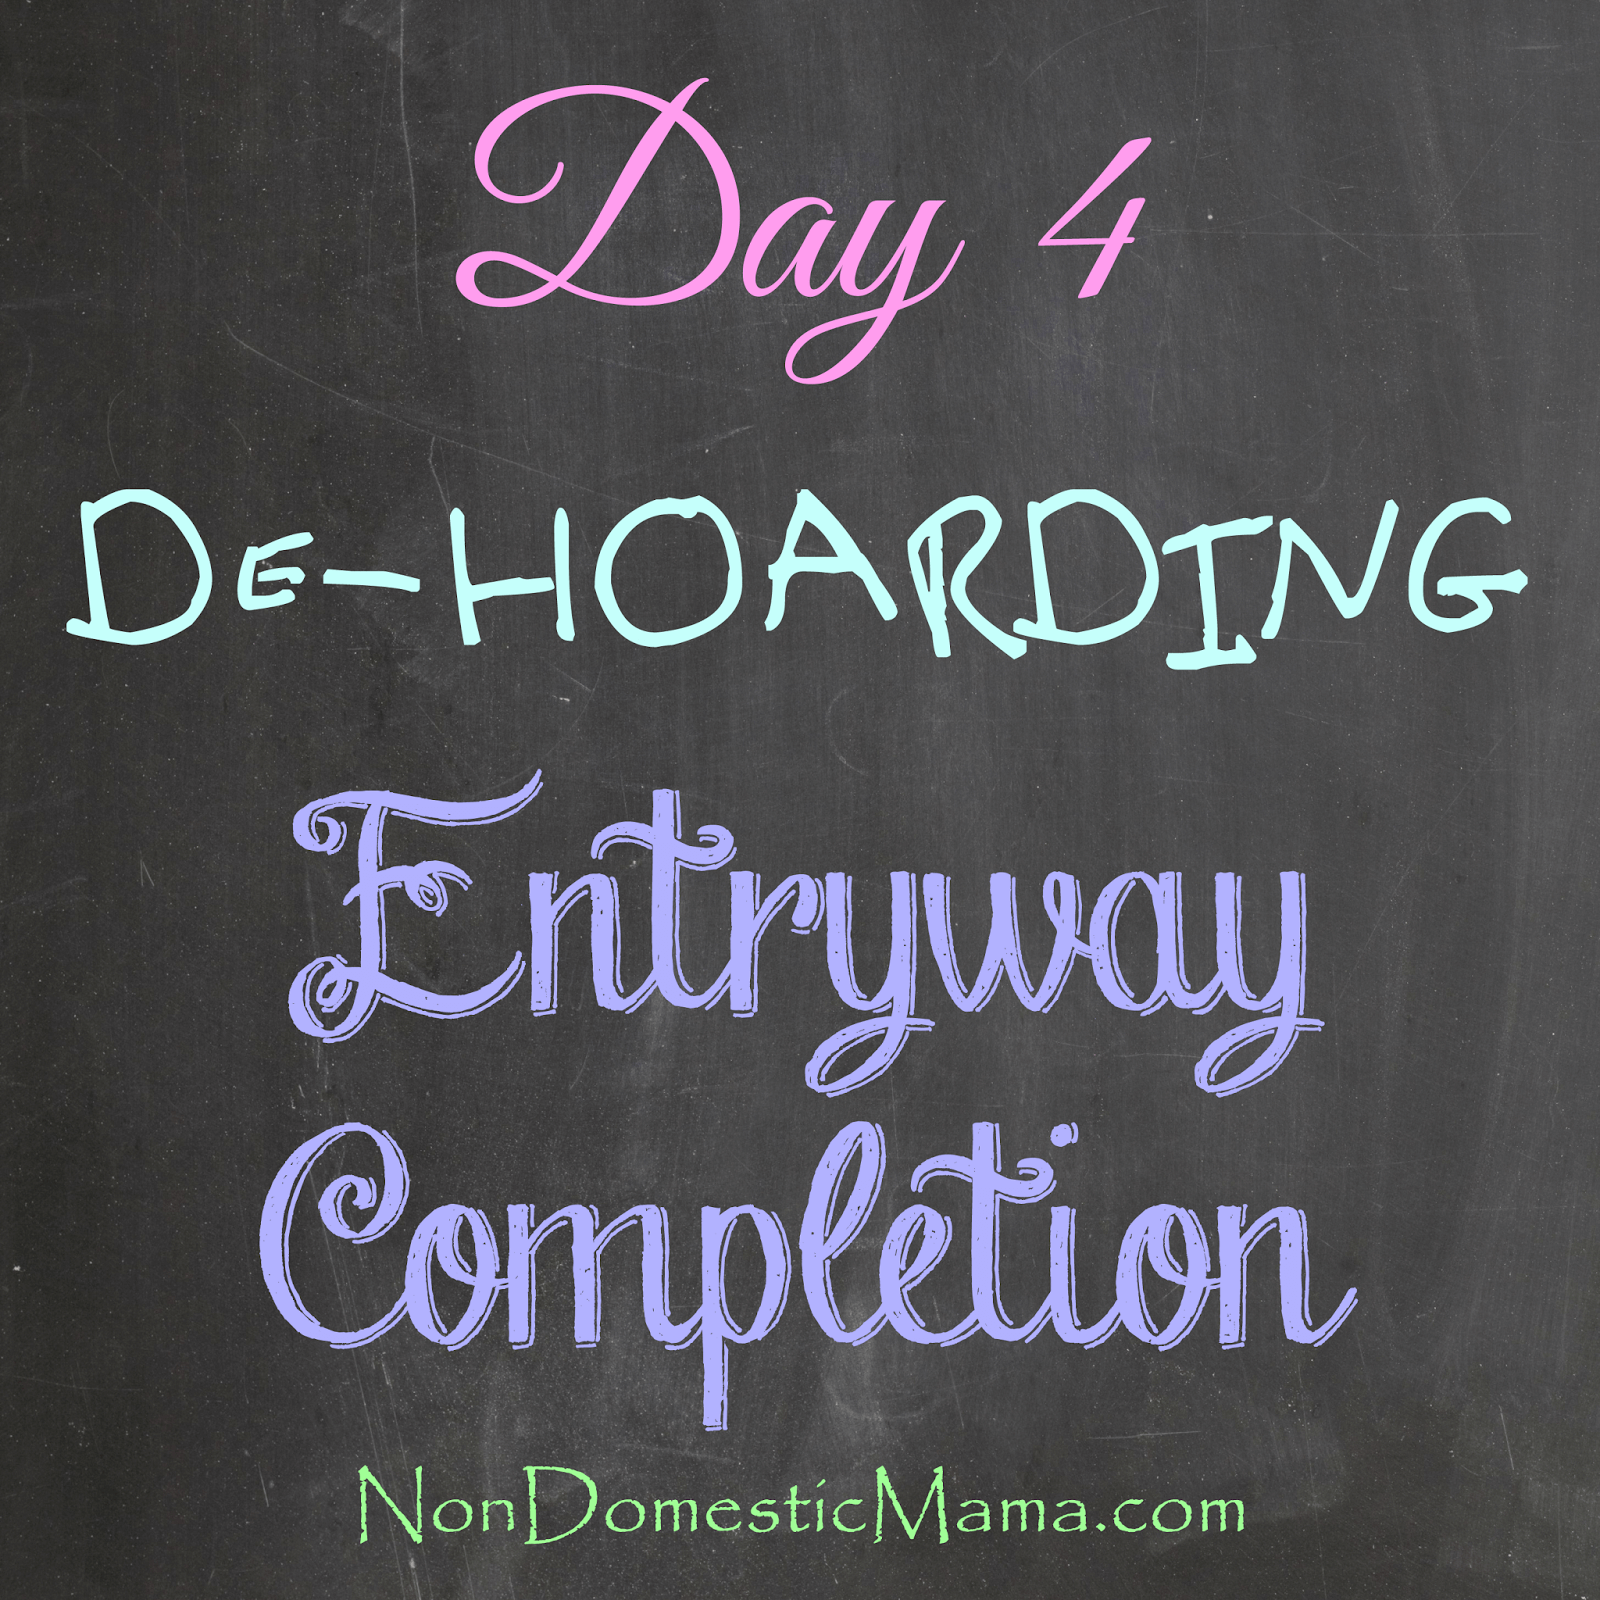 {Day 4} Entryway Finishing Touches - 31 Days of De-Hoarding #write31days